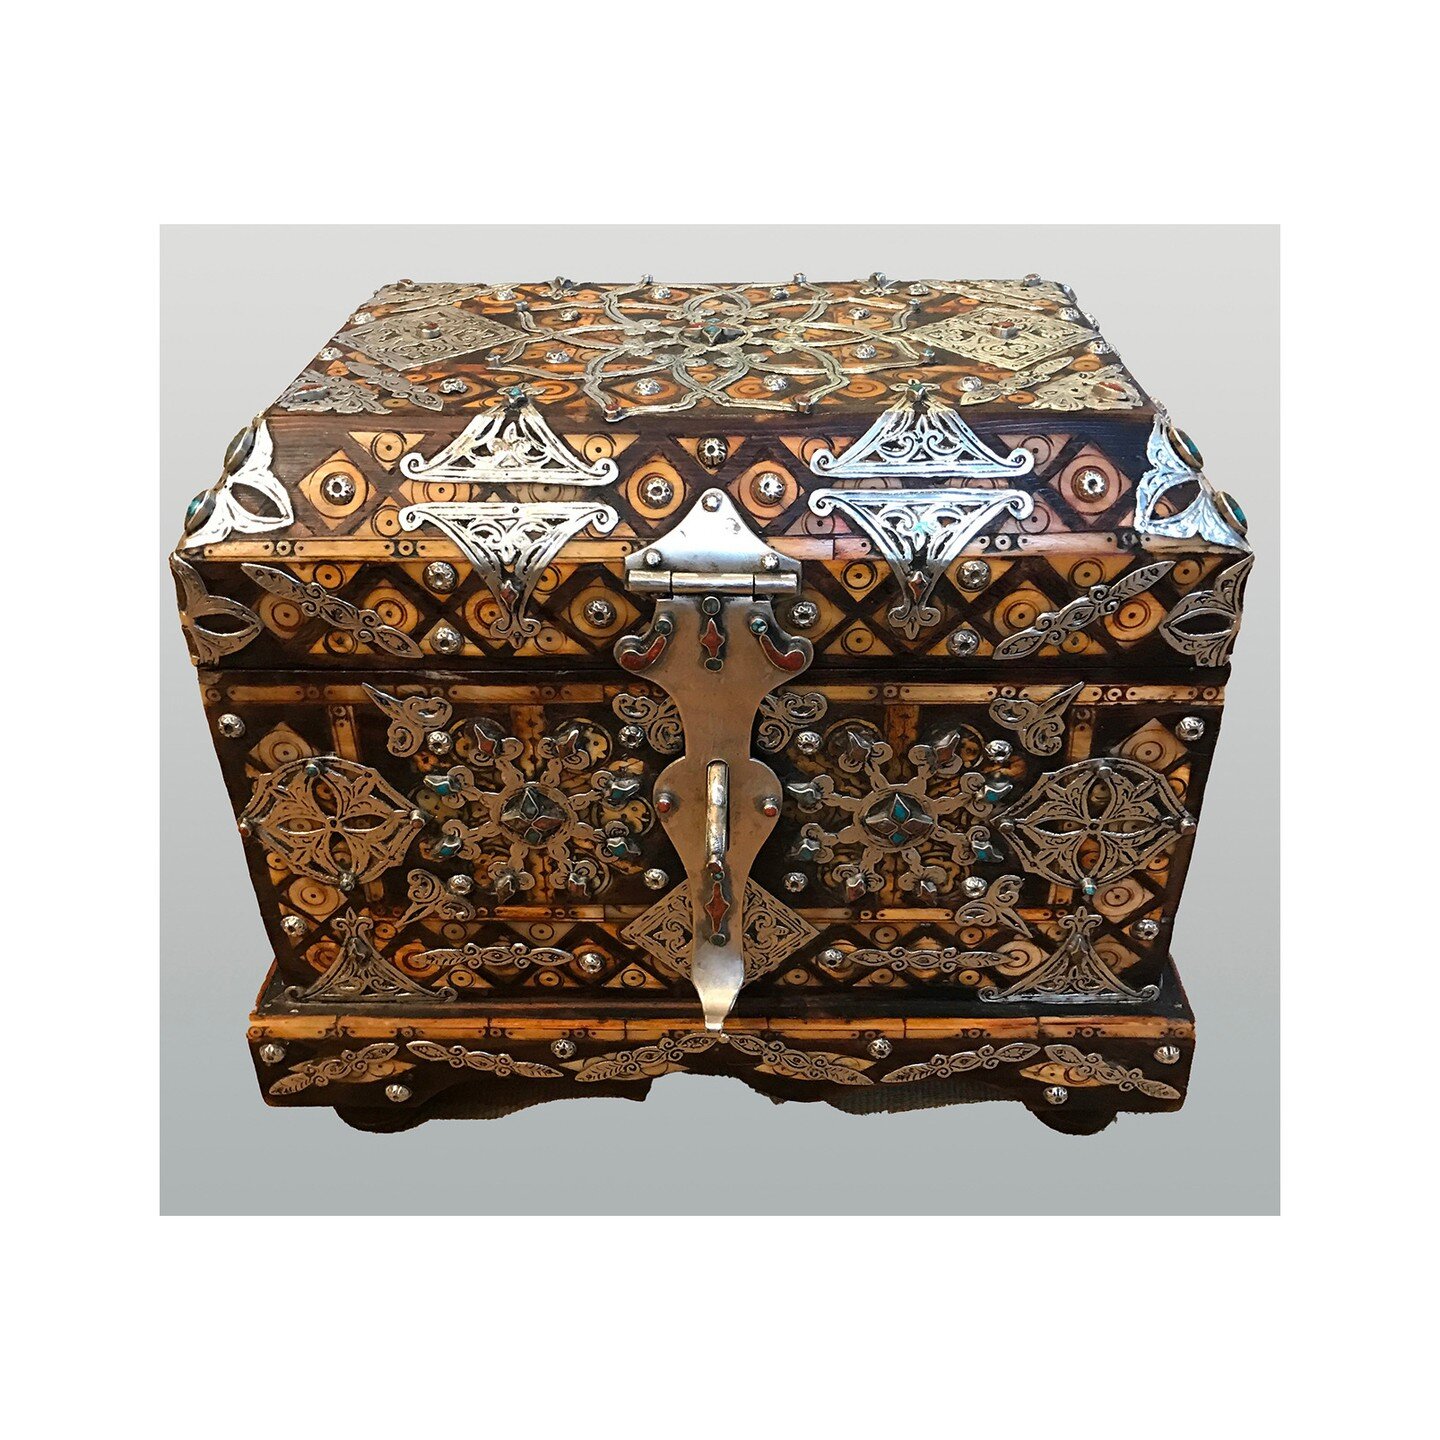 Store all of your treasures in this intricate inlaid Moroccan chest created with wood, sterling silver, camel bone and turquoise. Leather lined. 

#treasures #morocco #moroccanchest 
#jewelbox #exotic #sterlingsilver #wood #camel #turquoise #inlaid #